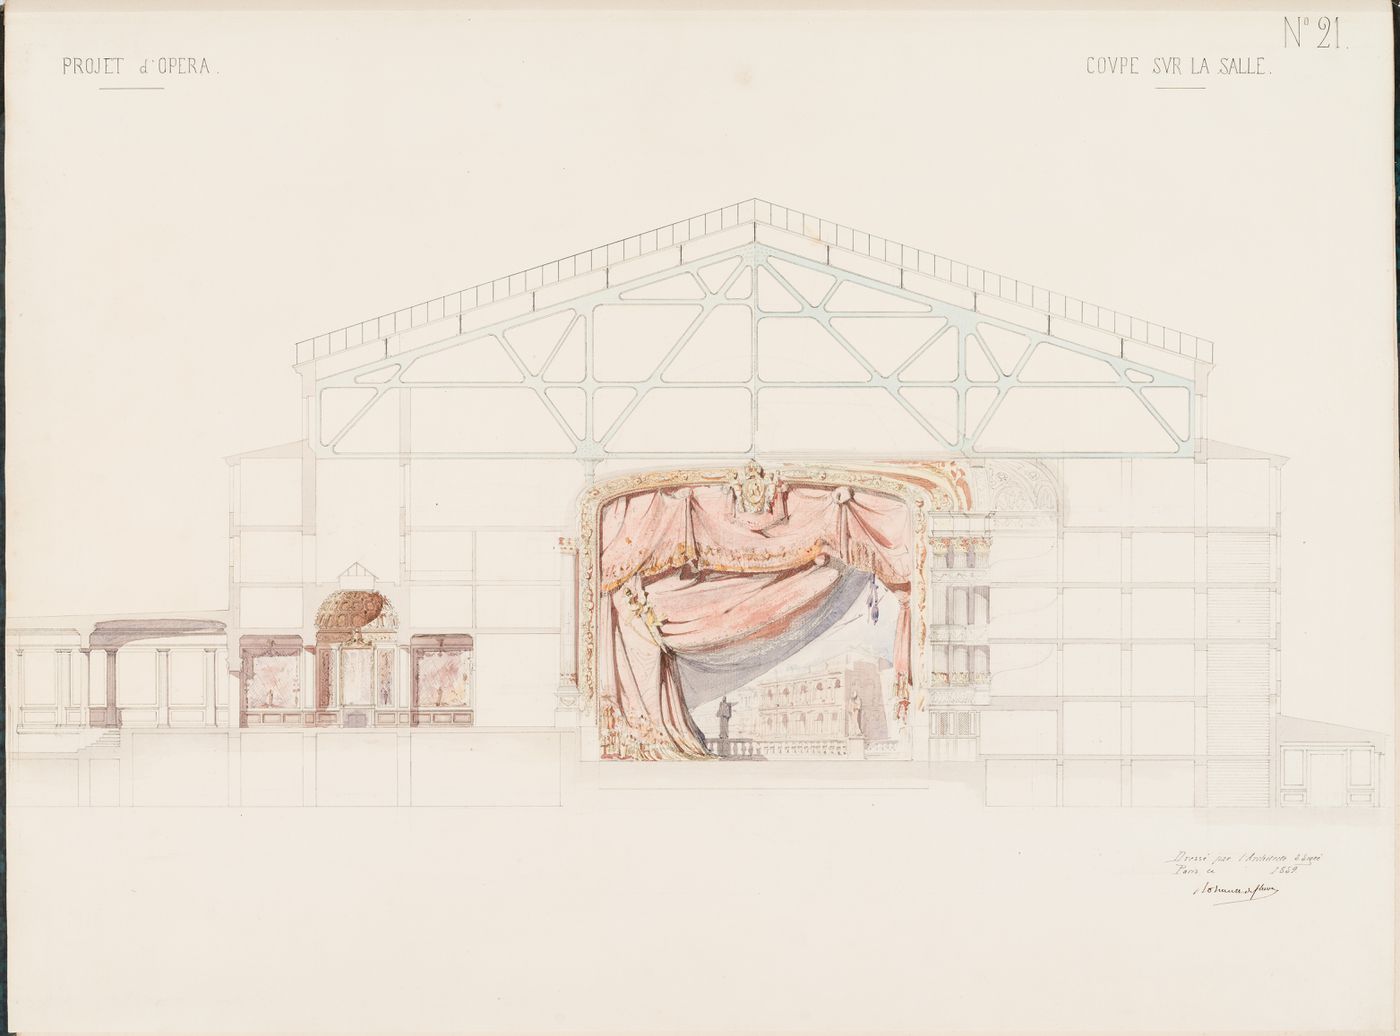 Project for an opera house for the Théâtre impérial de l'opéra: Cross section through the auditorium showing the stage curtain with a trompe-l'oeil view of the proposed principal façade